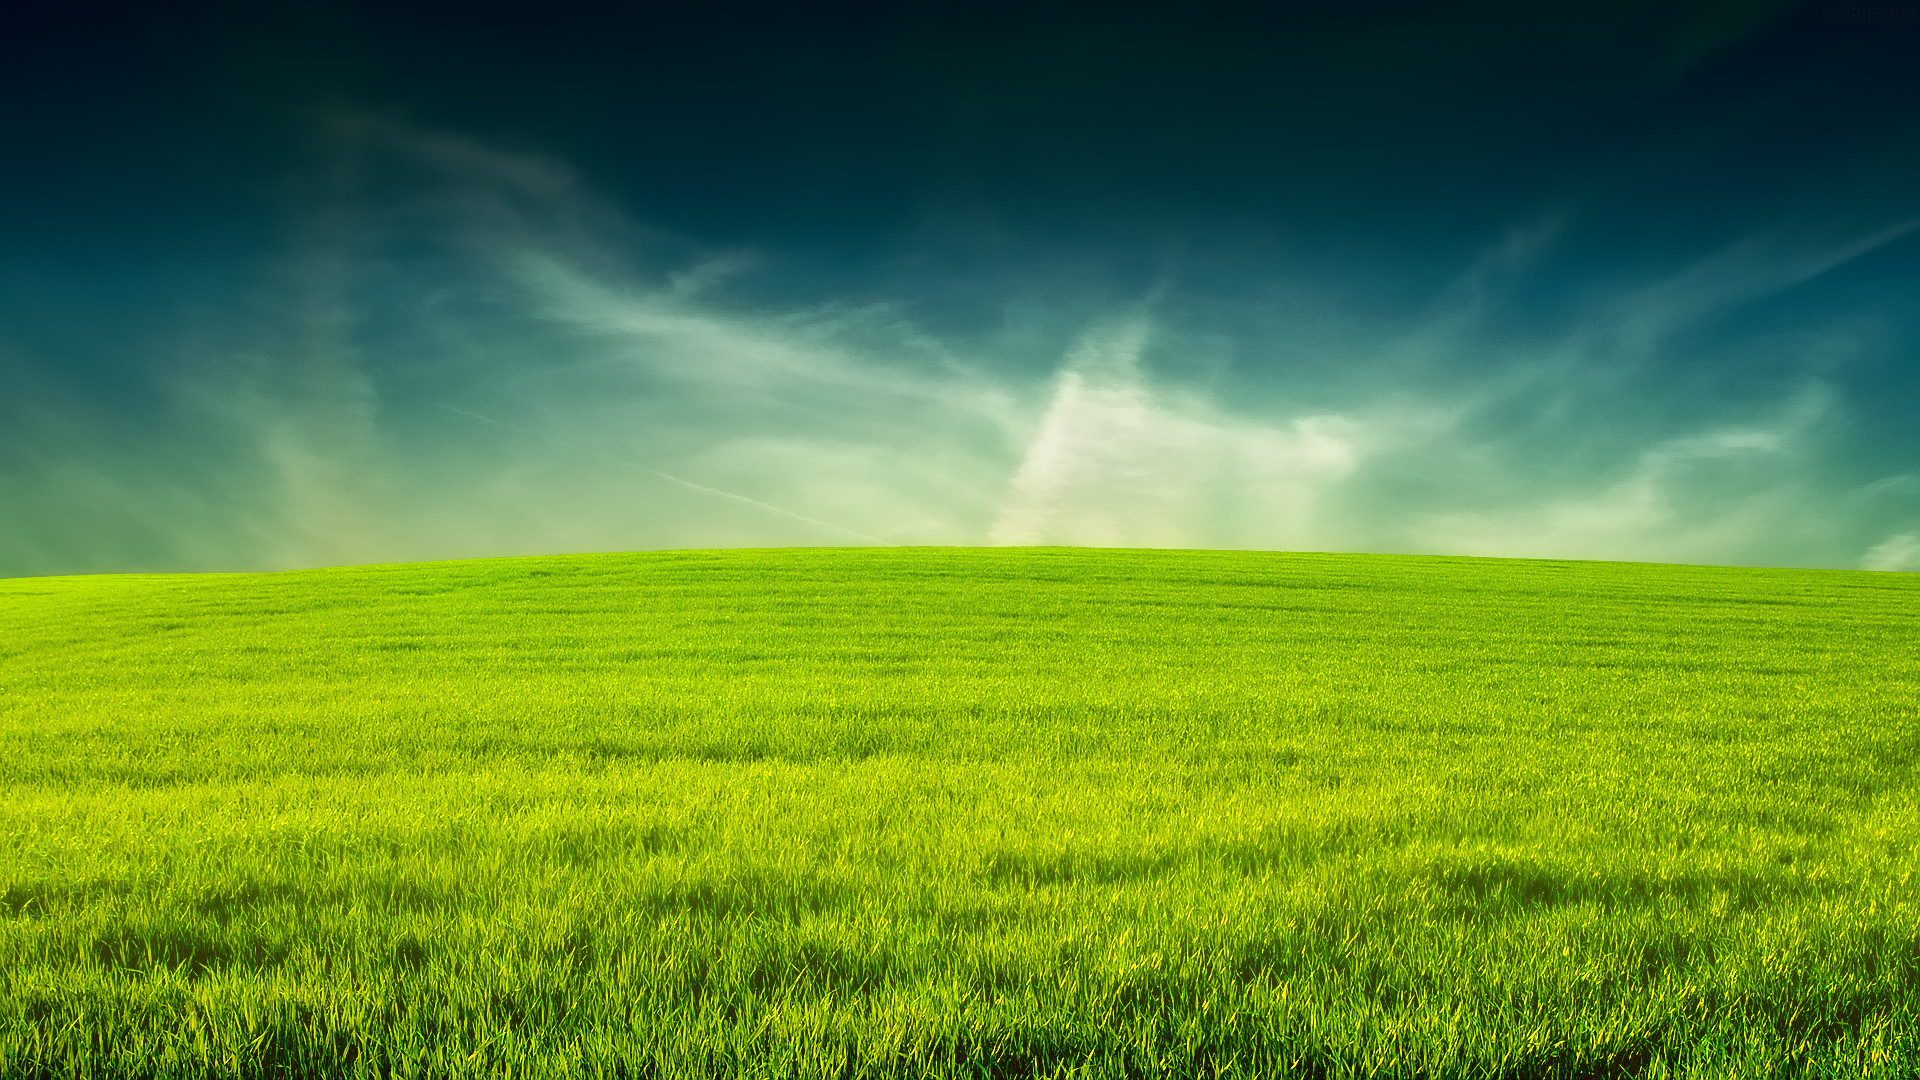 Grass and Sky Wallpaper (71+ images)